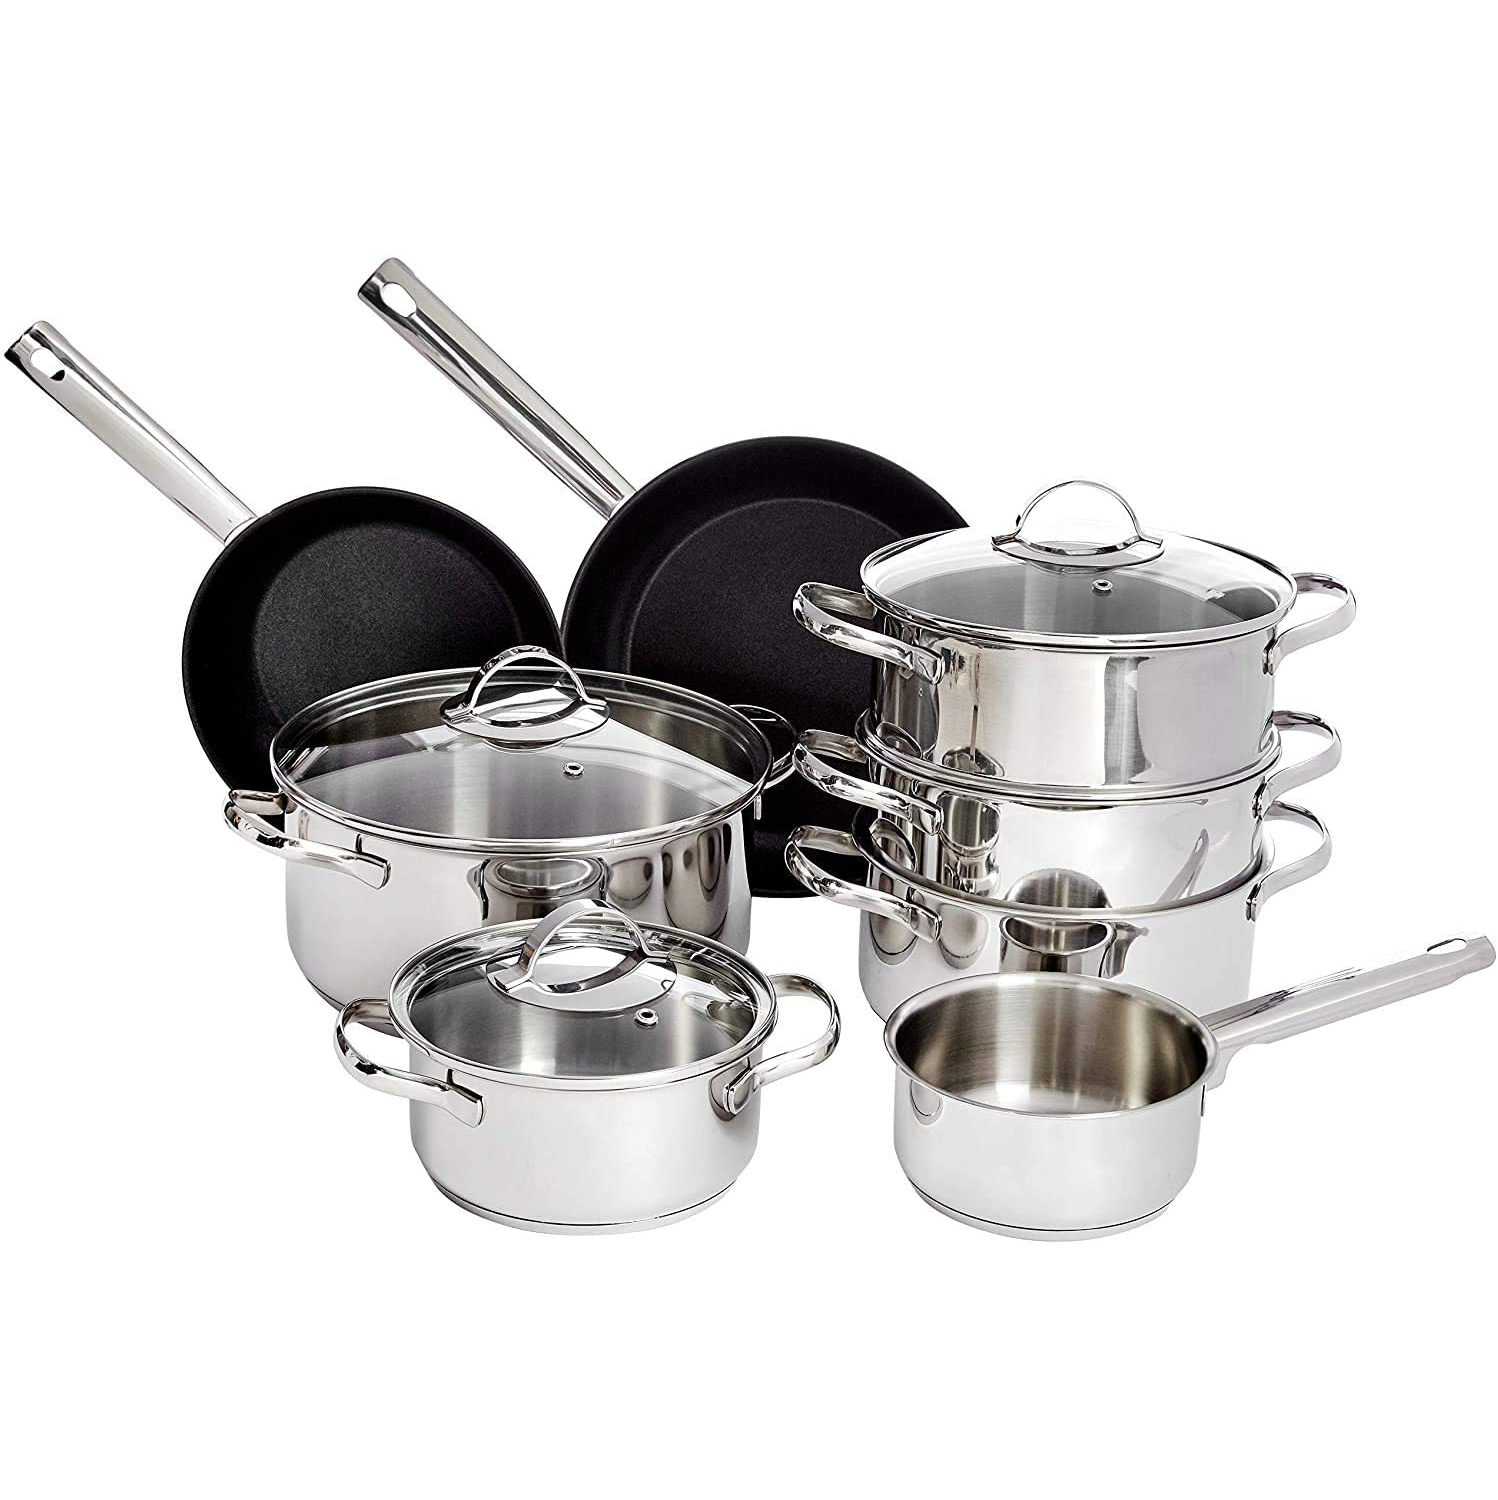 Factory direct Kitchenware 11 Pieces Stainless Steel Cookware set  for Kitchen appliance and with Tempered Filter Lid